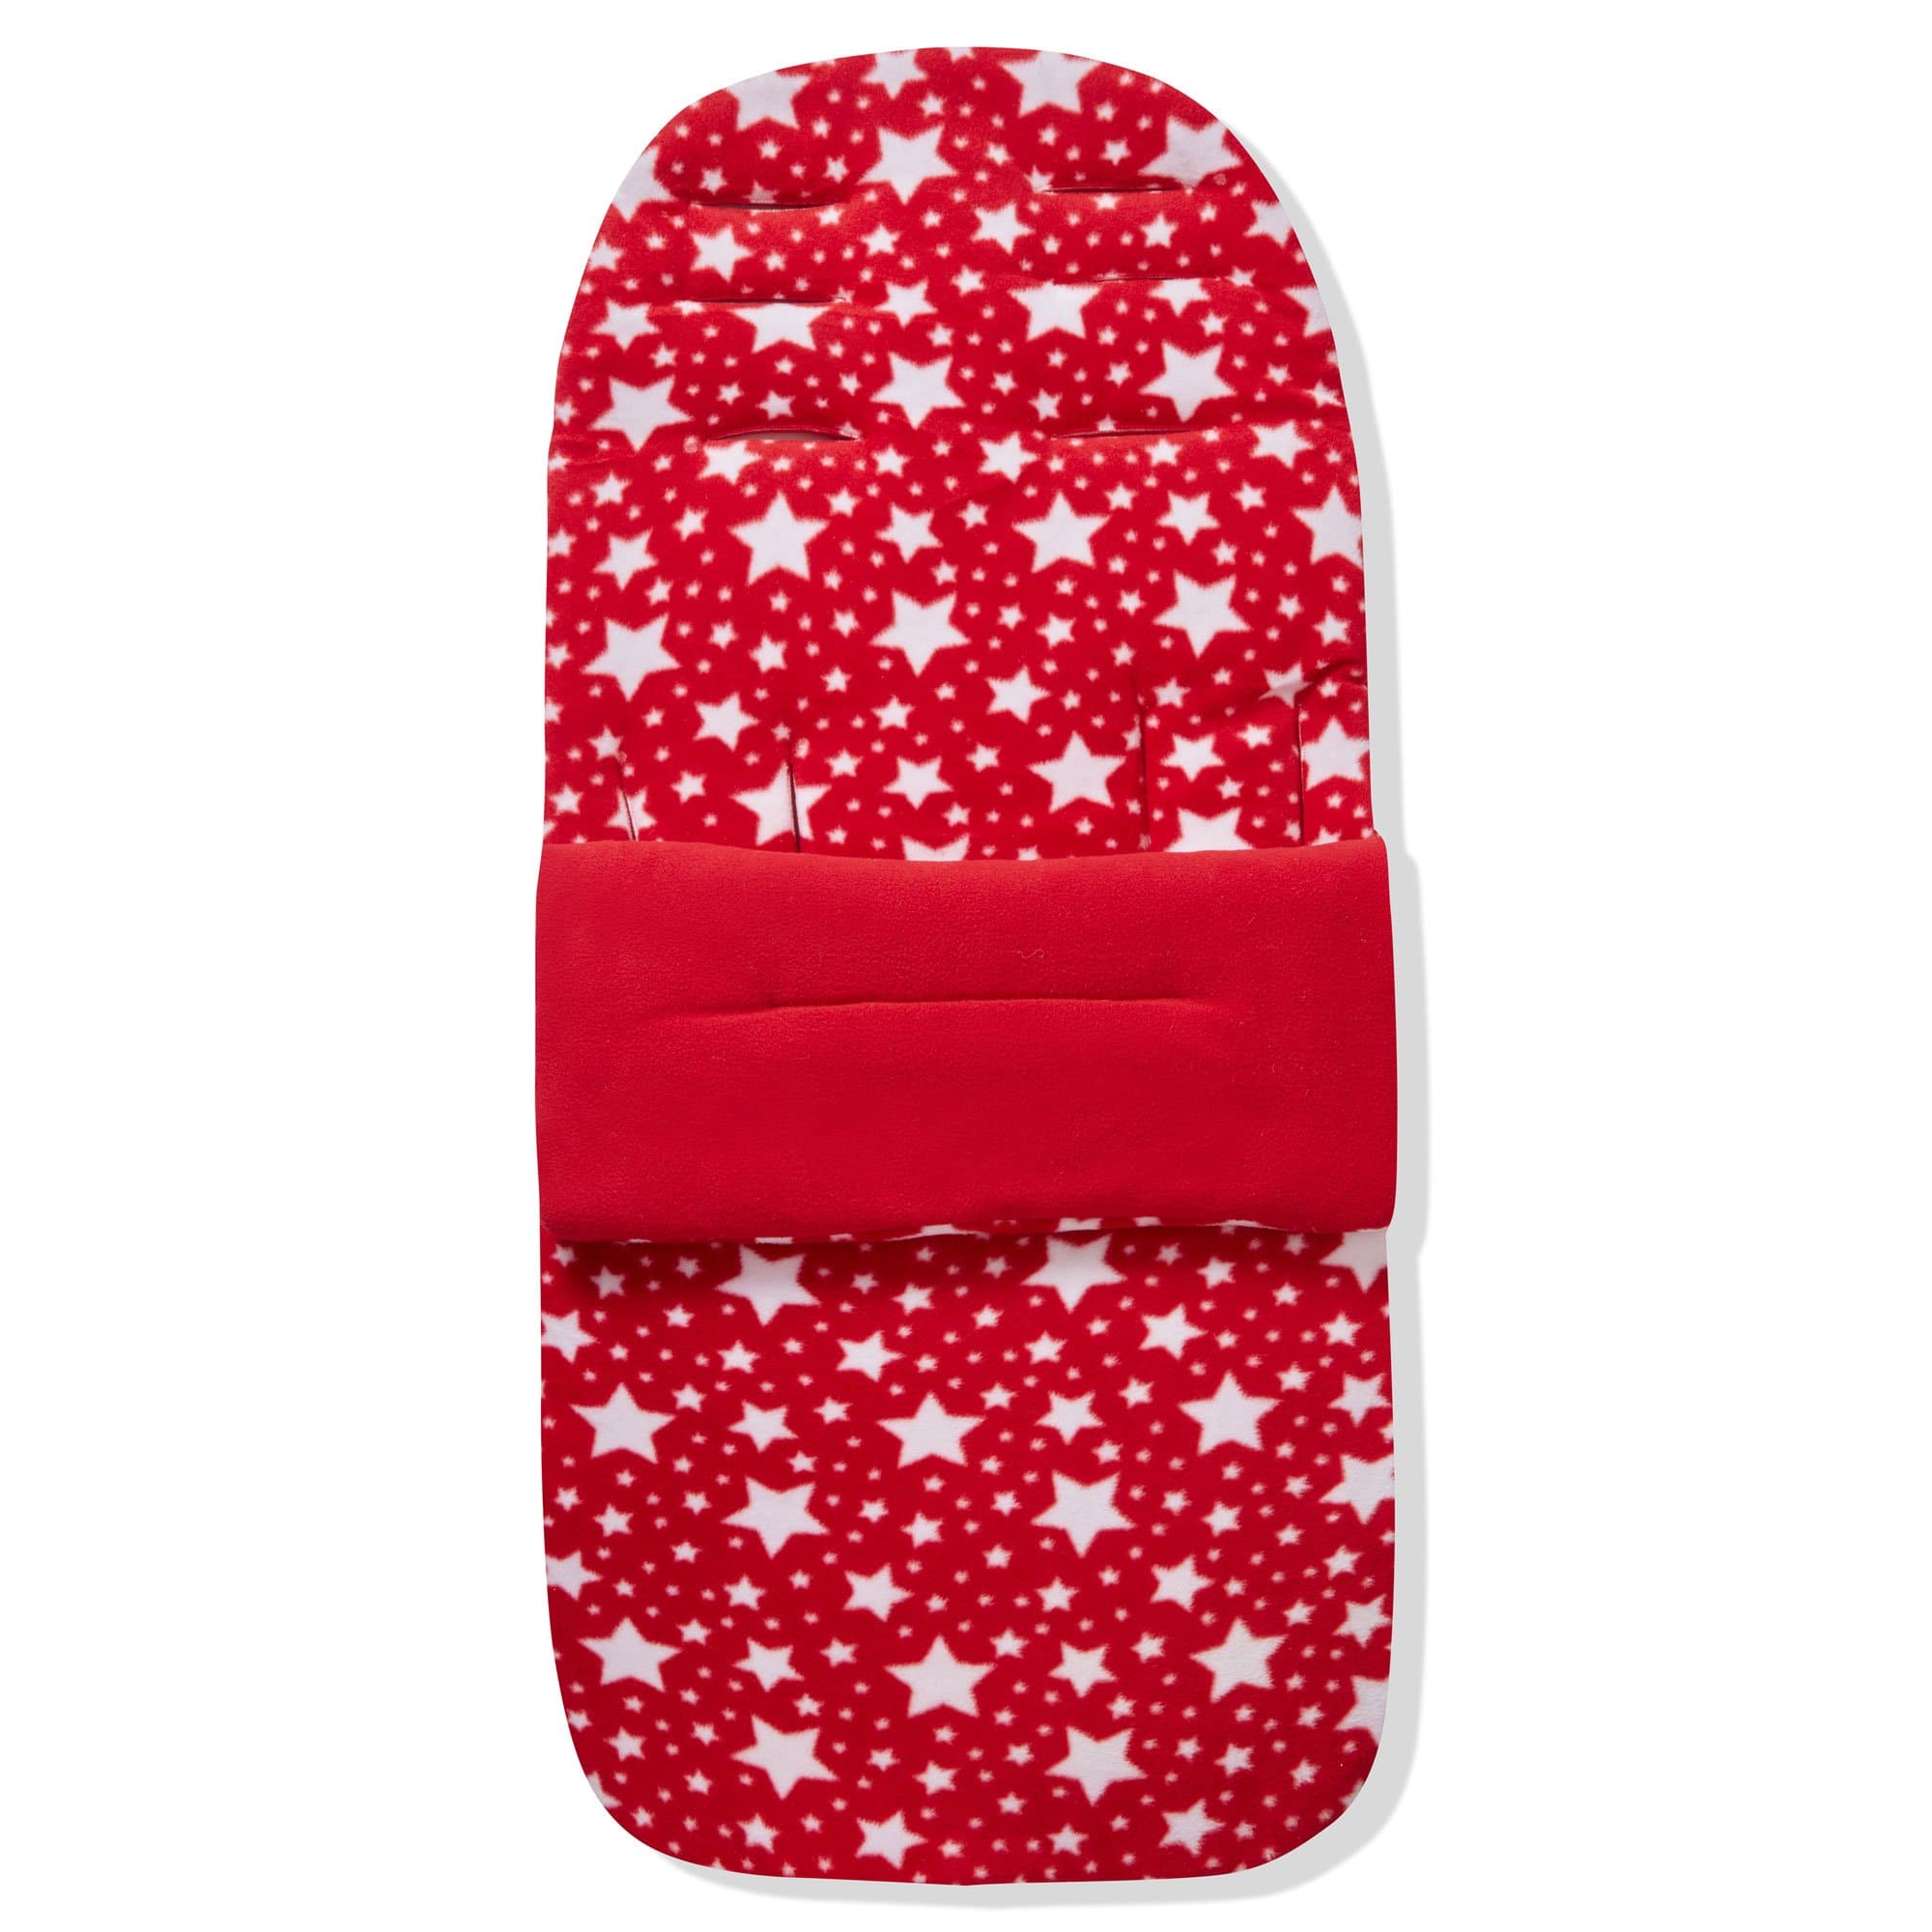 Fleece Footmuff / Cosy Toes Compatible with Maxi Cosi - For Your Little One